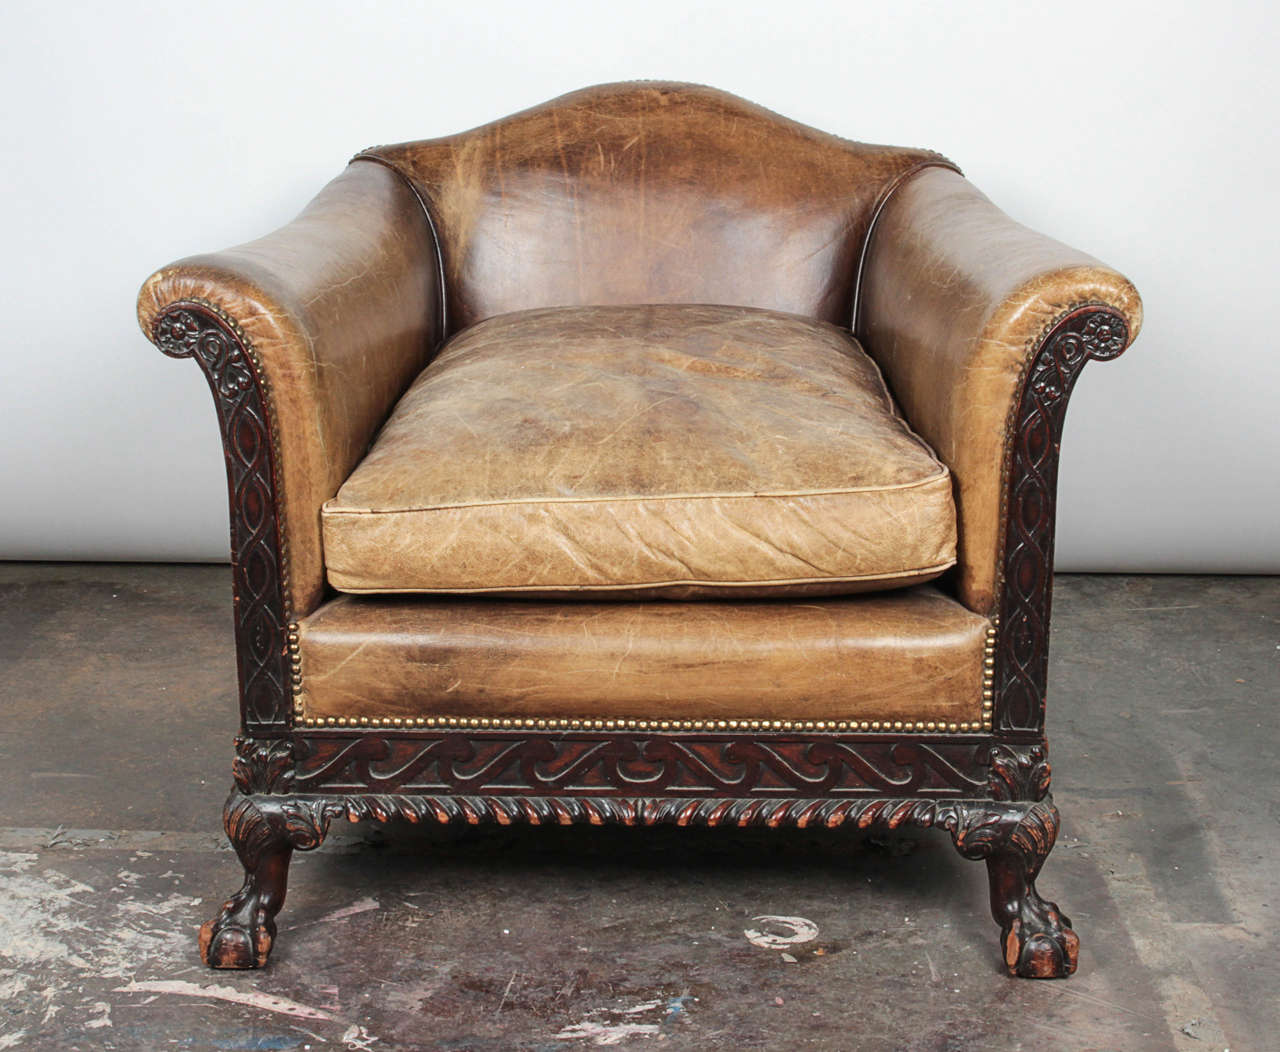 Aged leather and finely carved wooden details add significant character to this intriguing antique. Brass nailhead trim accentuates the curves of the arms and sides of the chair. 

Not available for sale or to ship in the state of California.